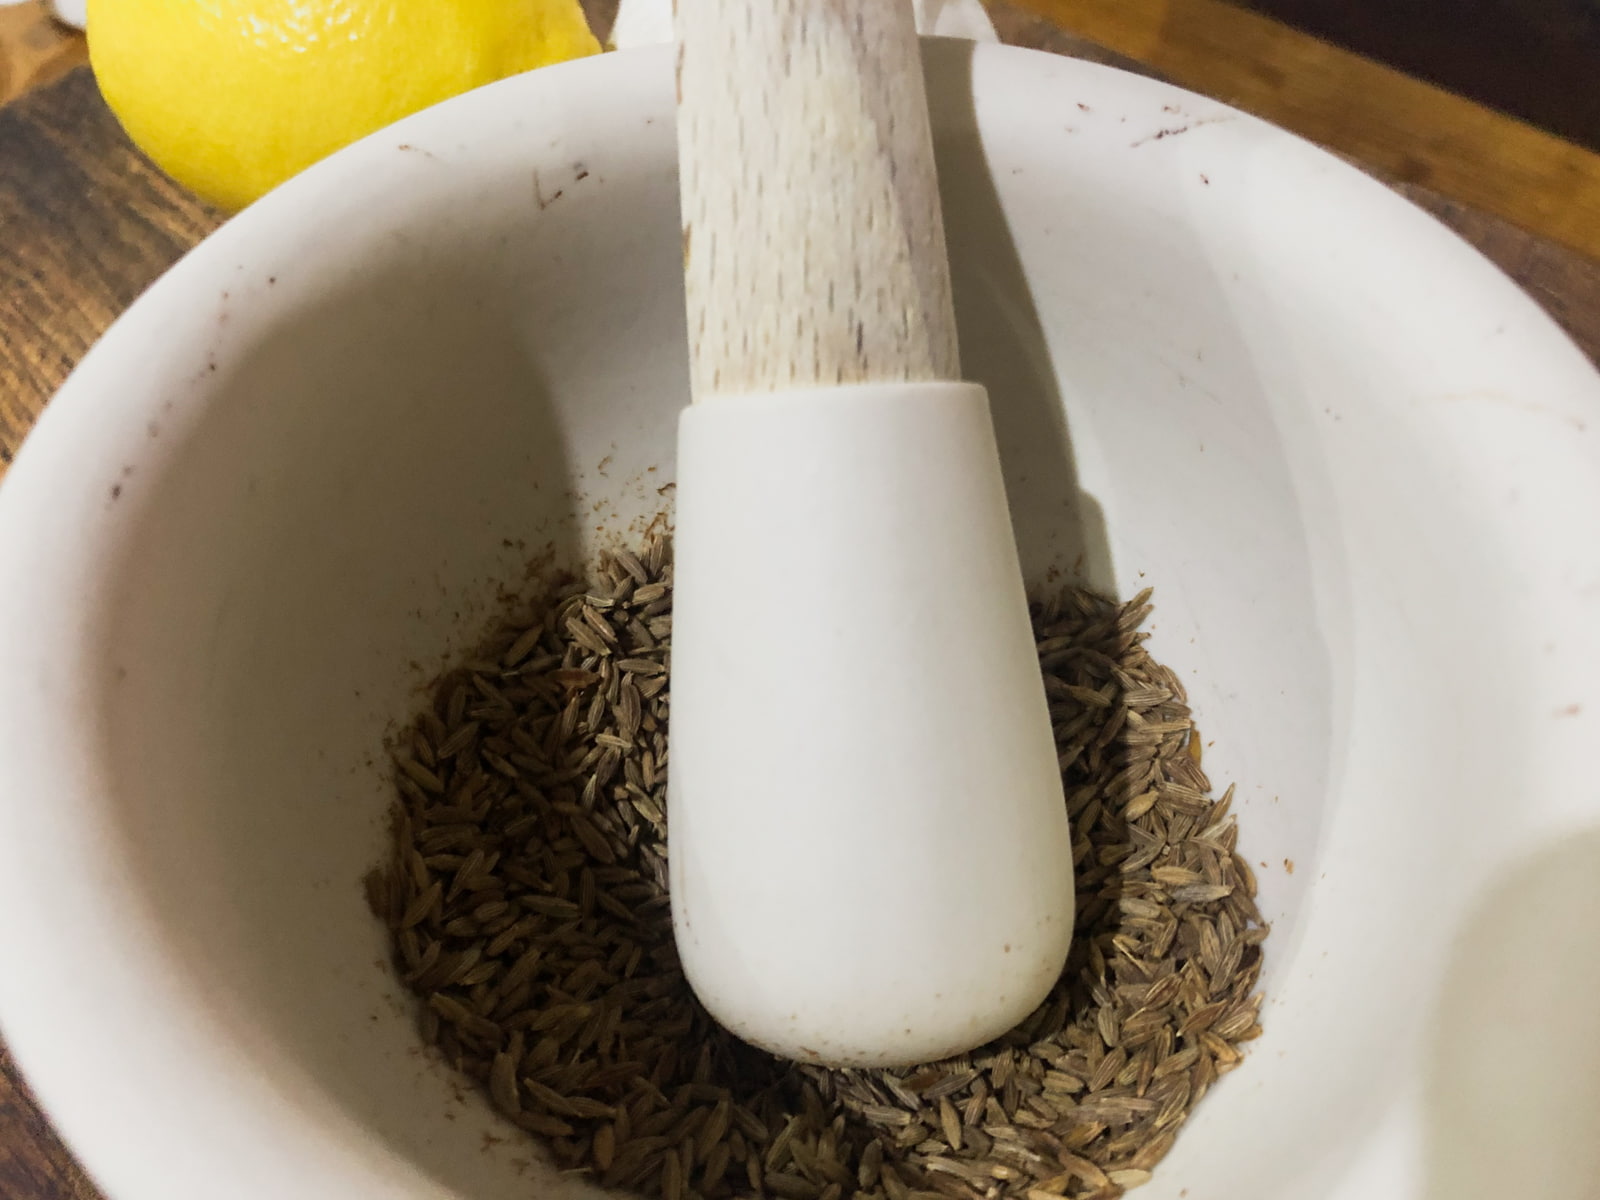 Crushing toasted cumin seeds in a pestle and mortar.